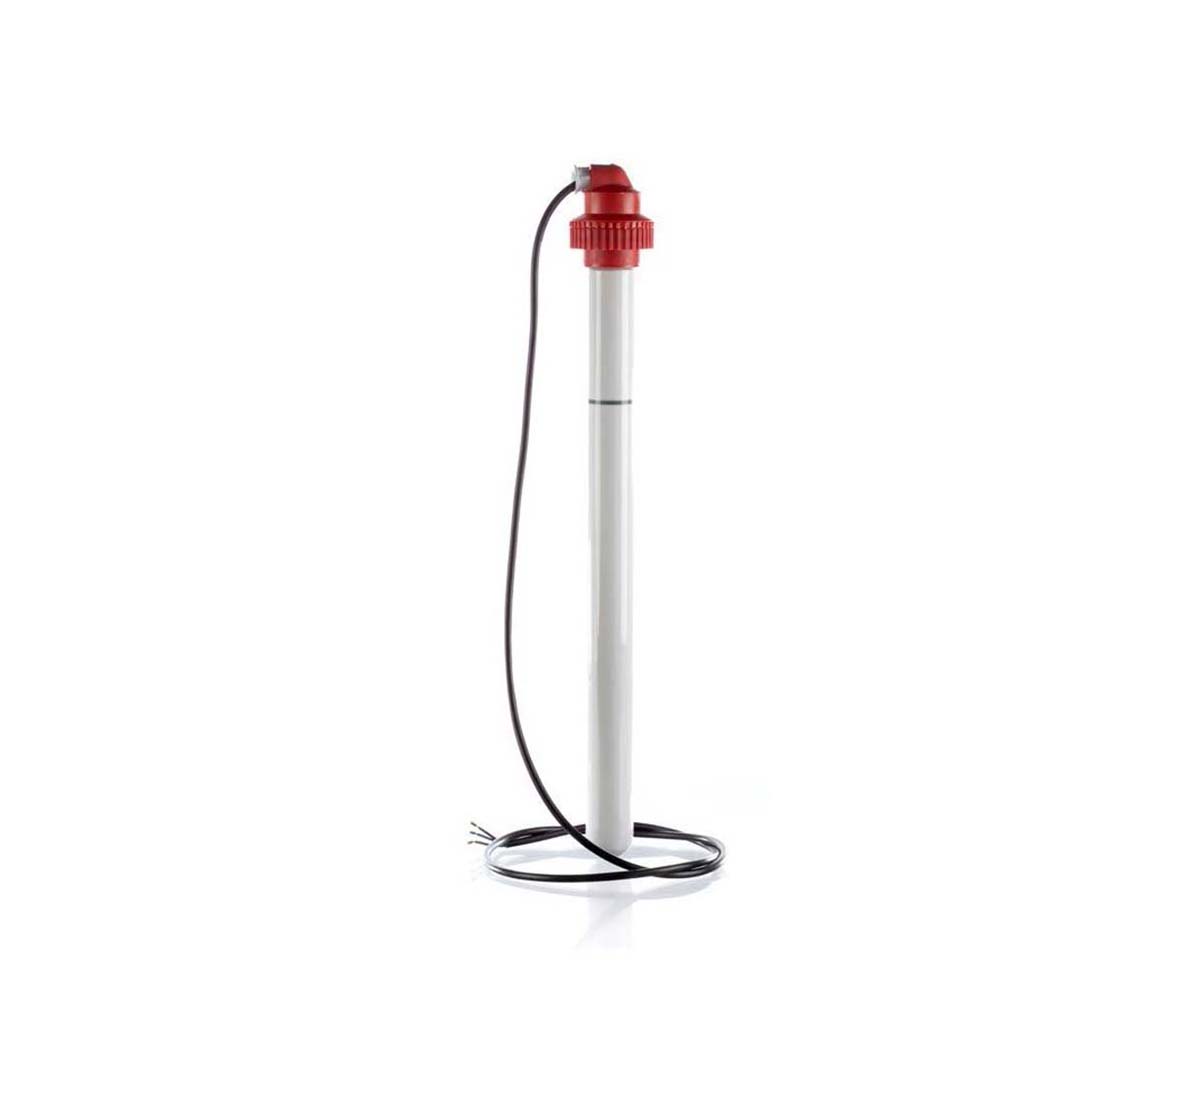 A picture of a over the side immersion heaters with tube in porcelain from Backer